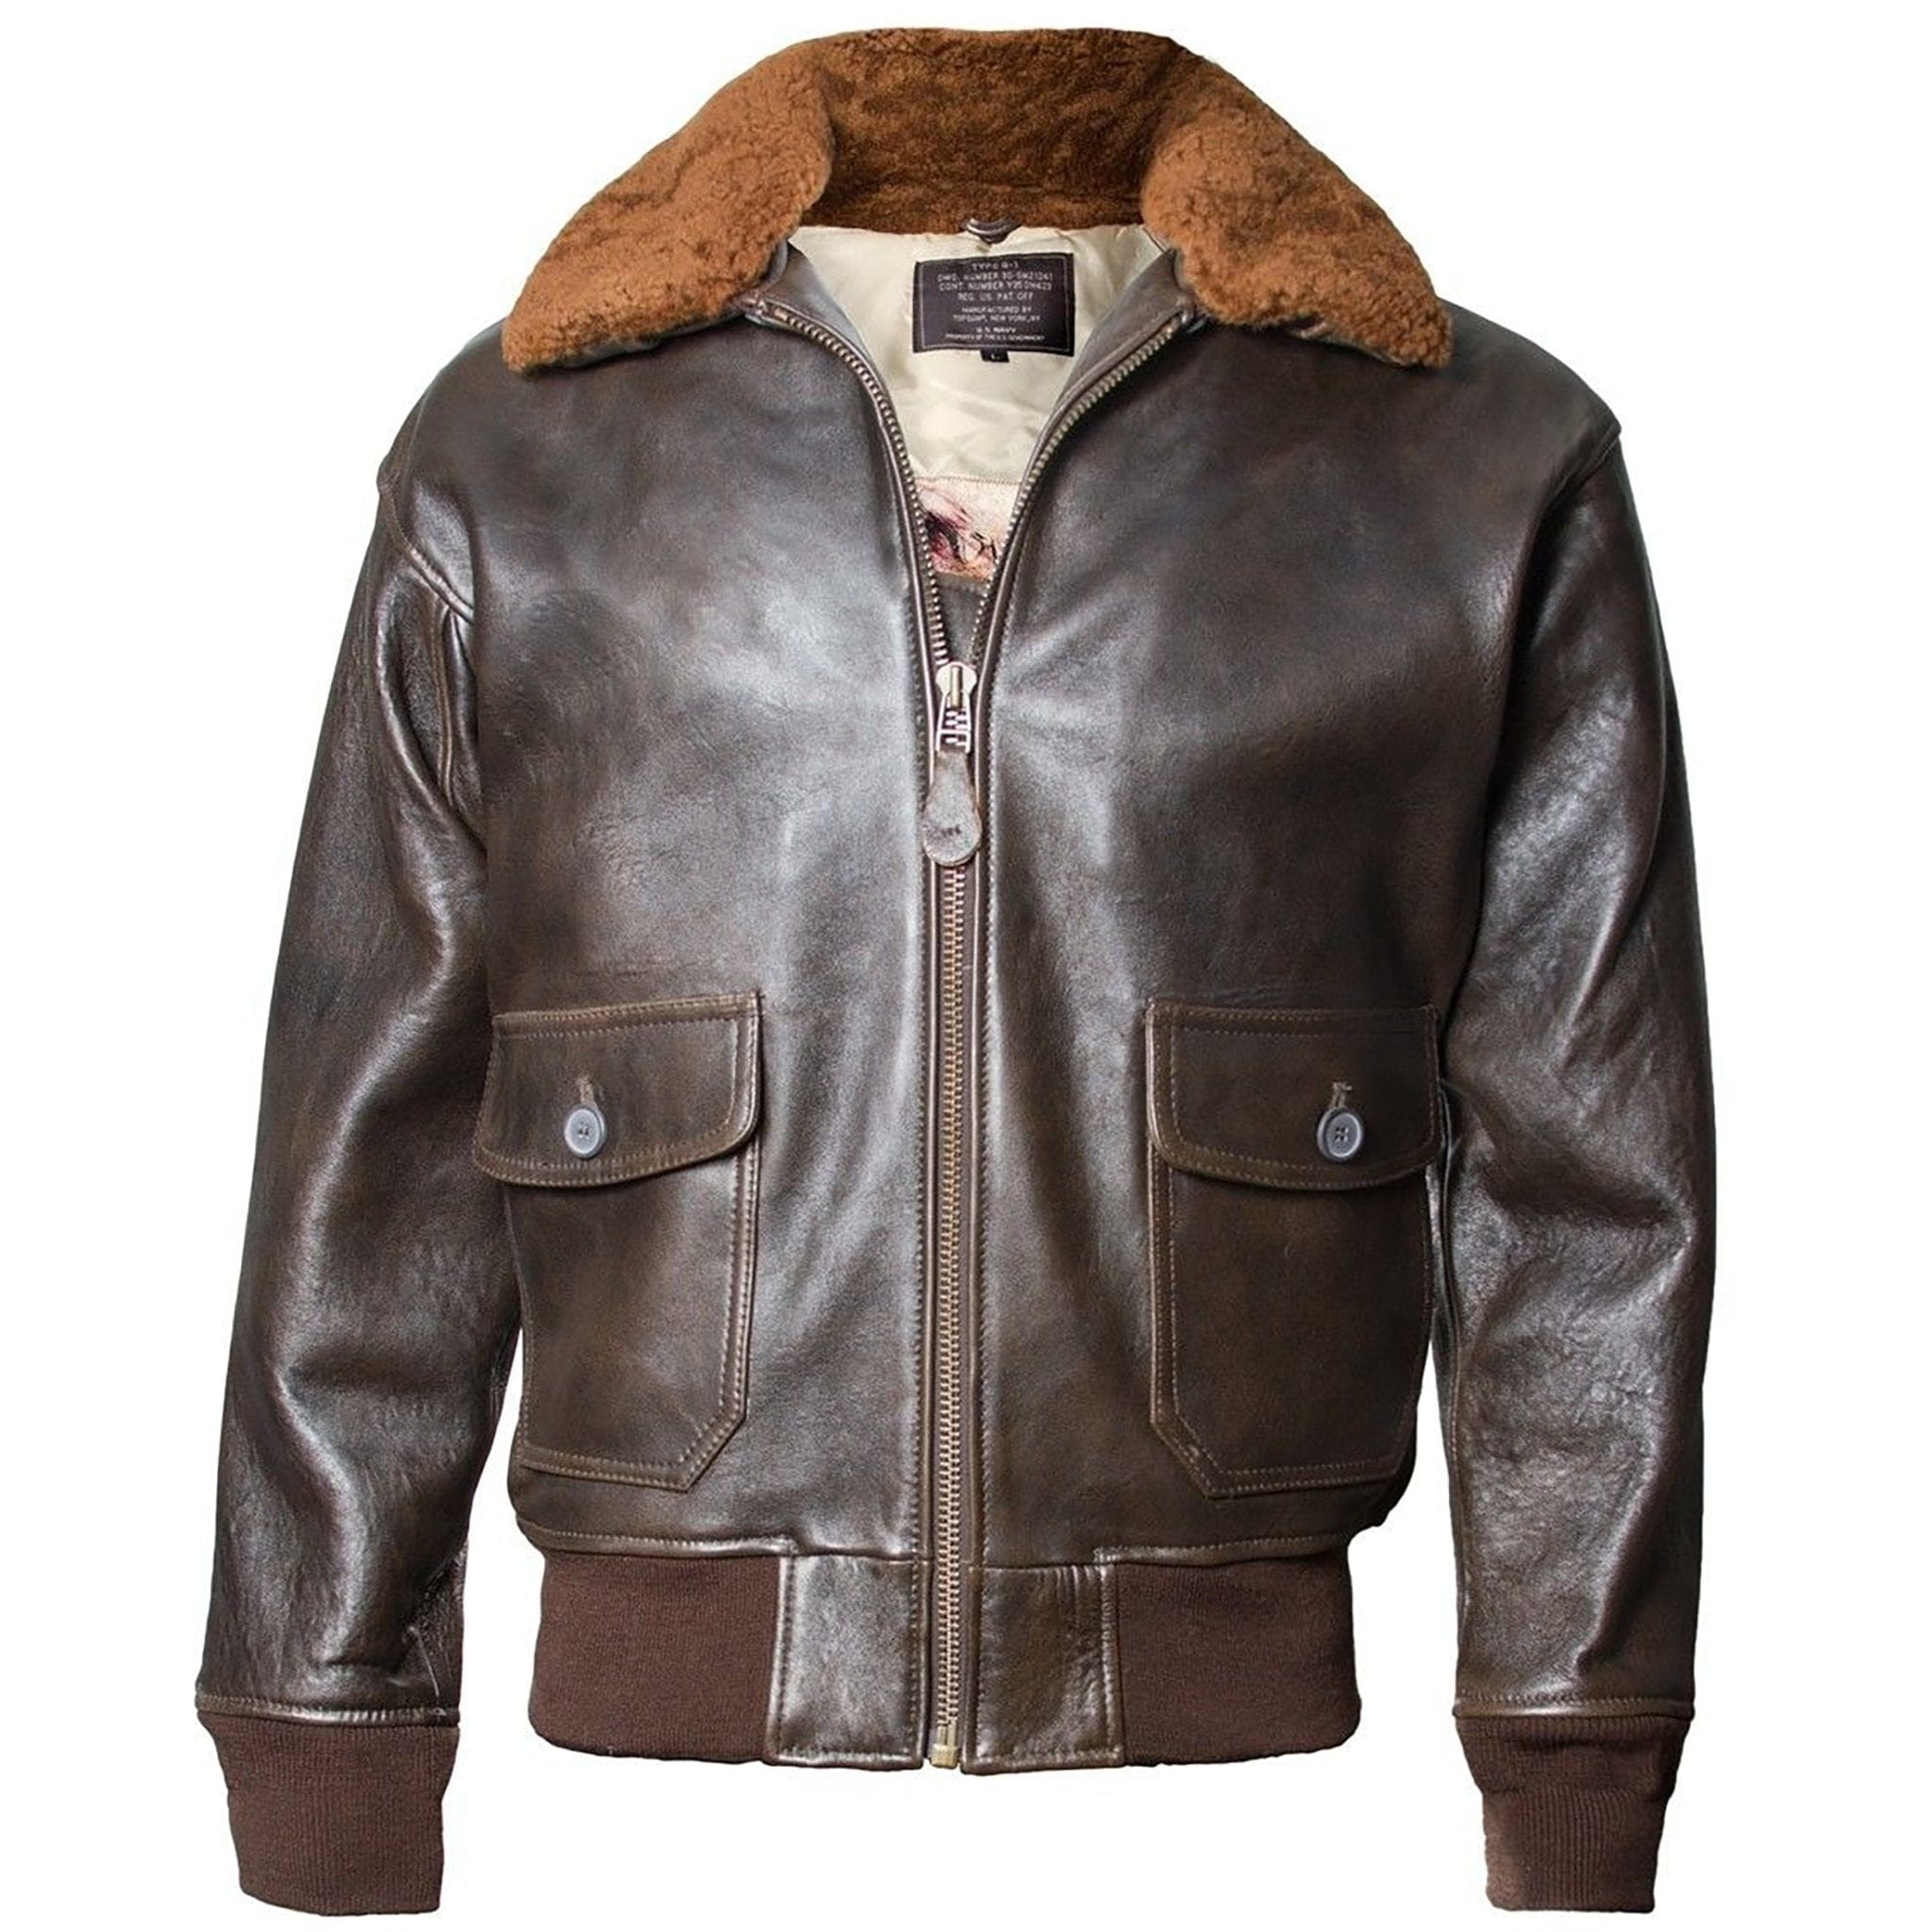 Top Gun® Official G-1 Leather Jacket